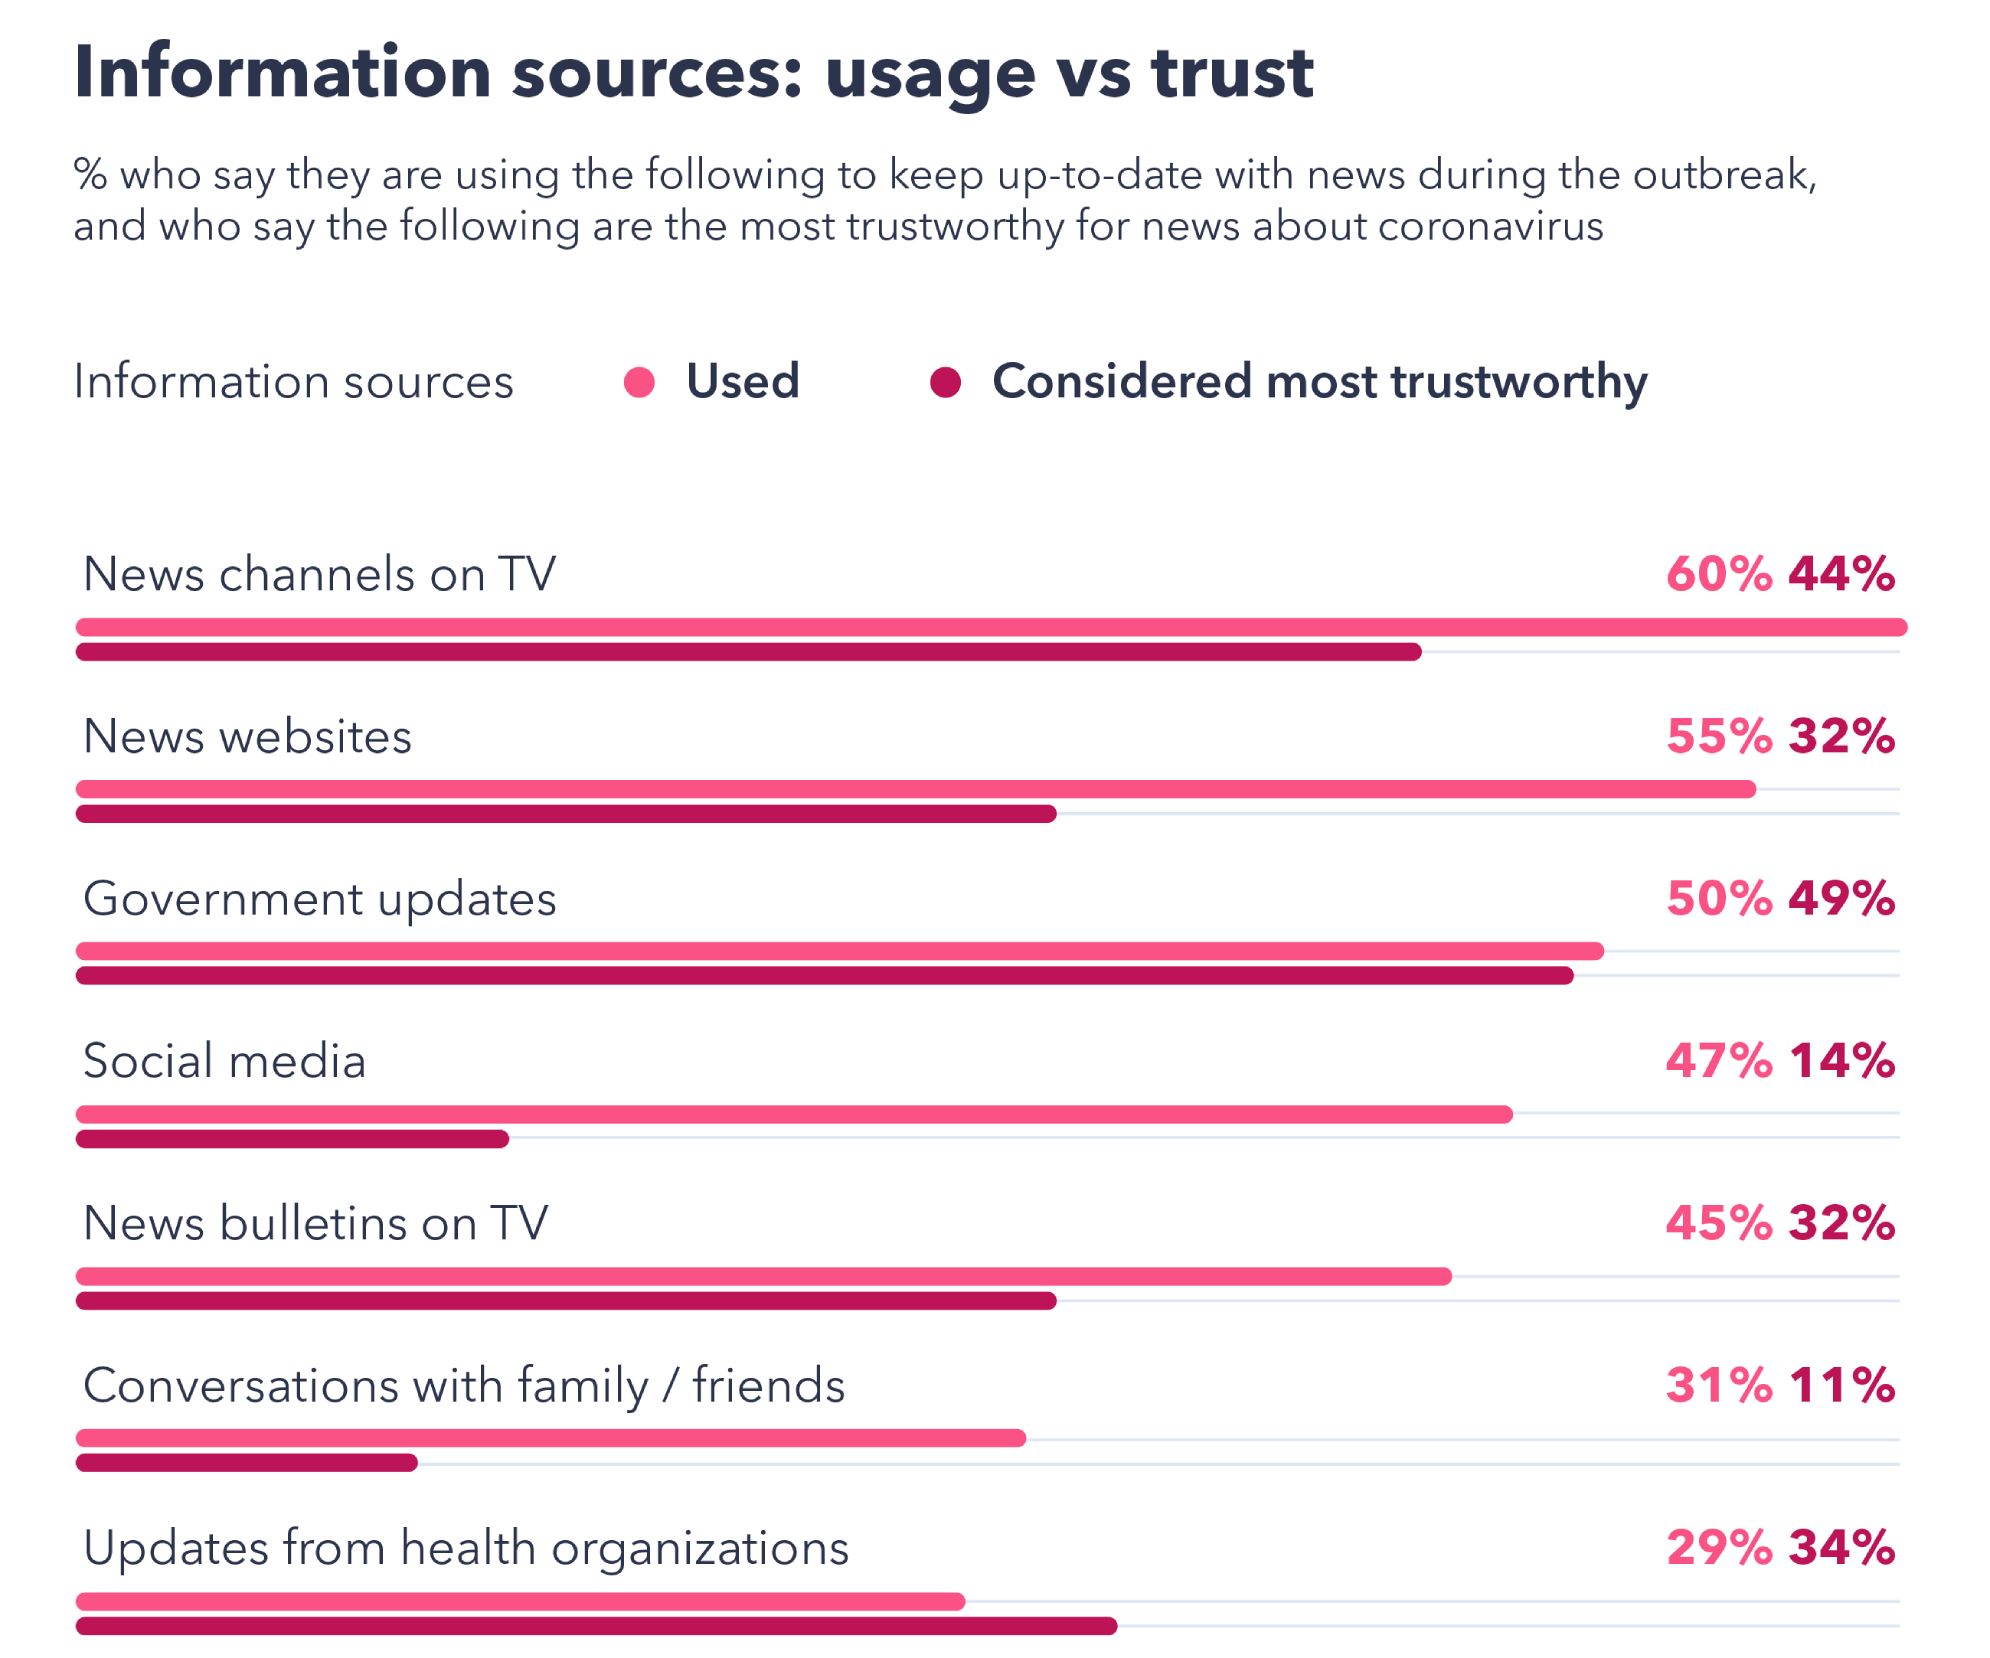 News channels and government updates are the most trusted sources of information, with social media lagging behind